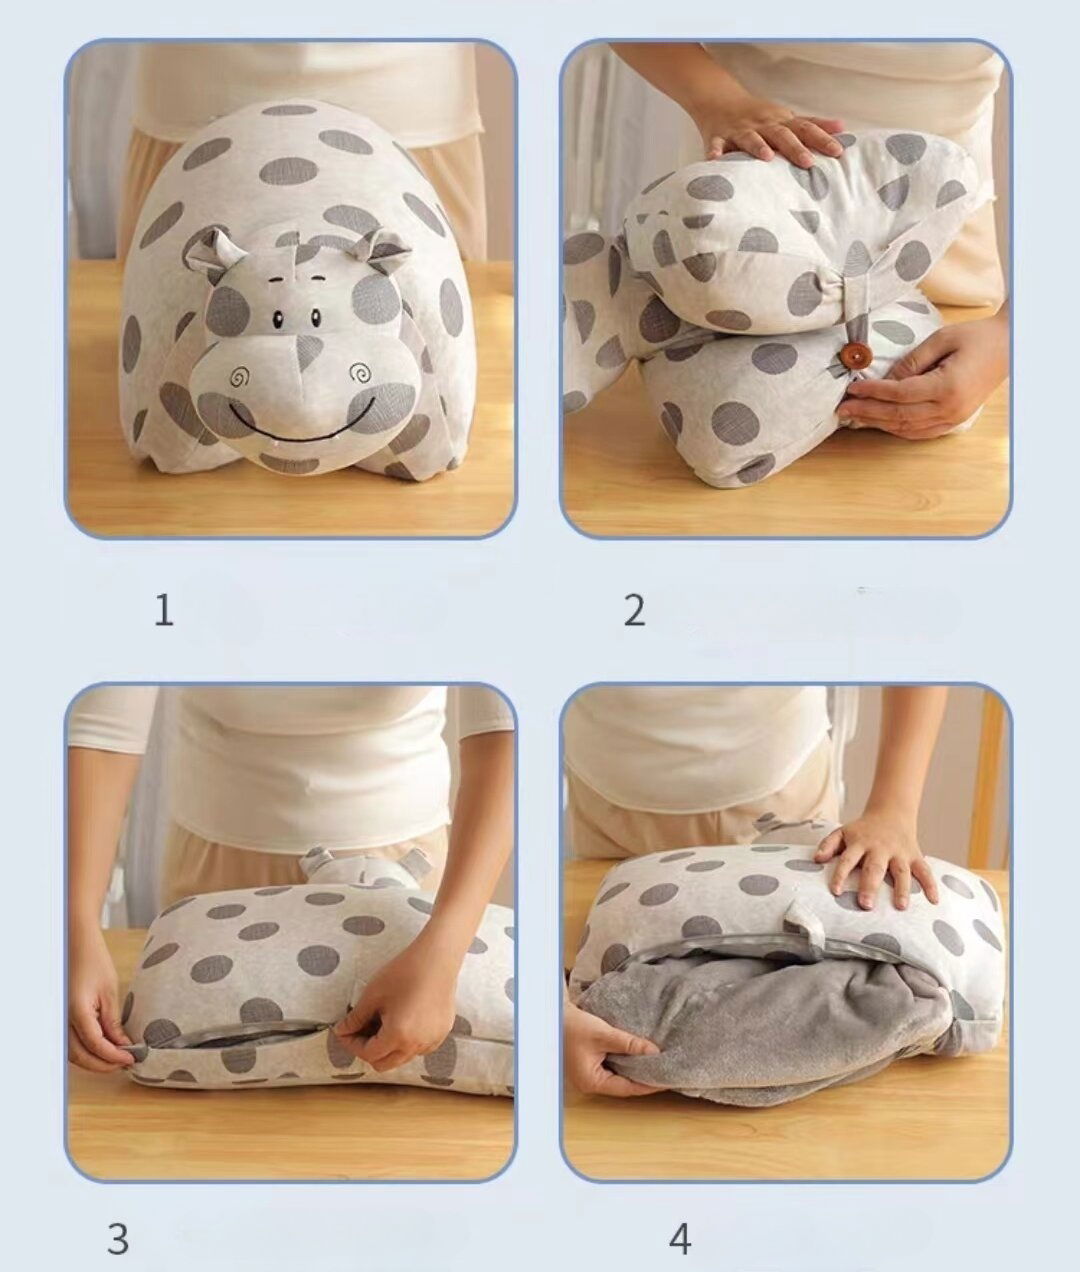 Pillow Blanket 2 In 1,travel pillow & blanket,office nap pillow with blanket 4